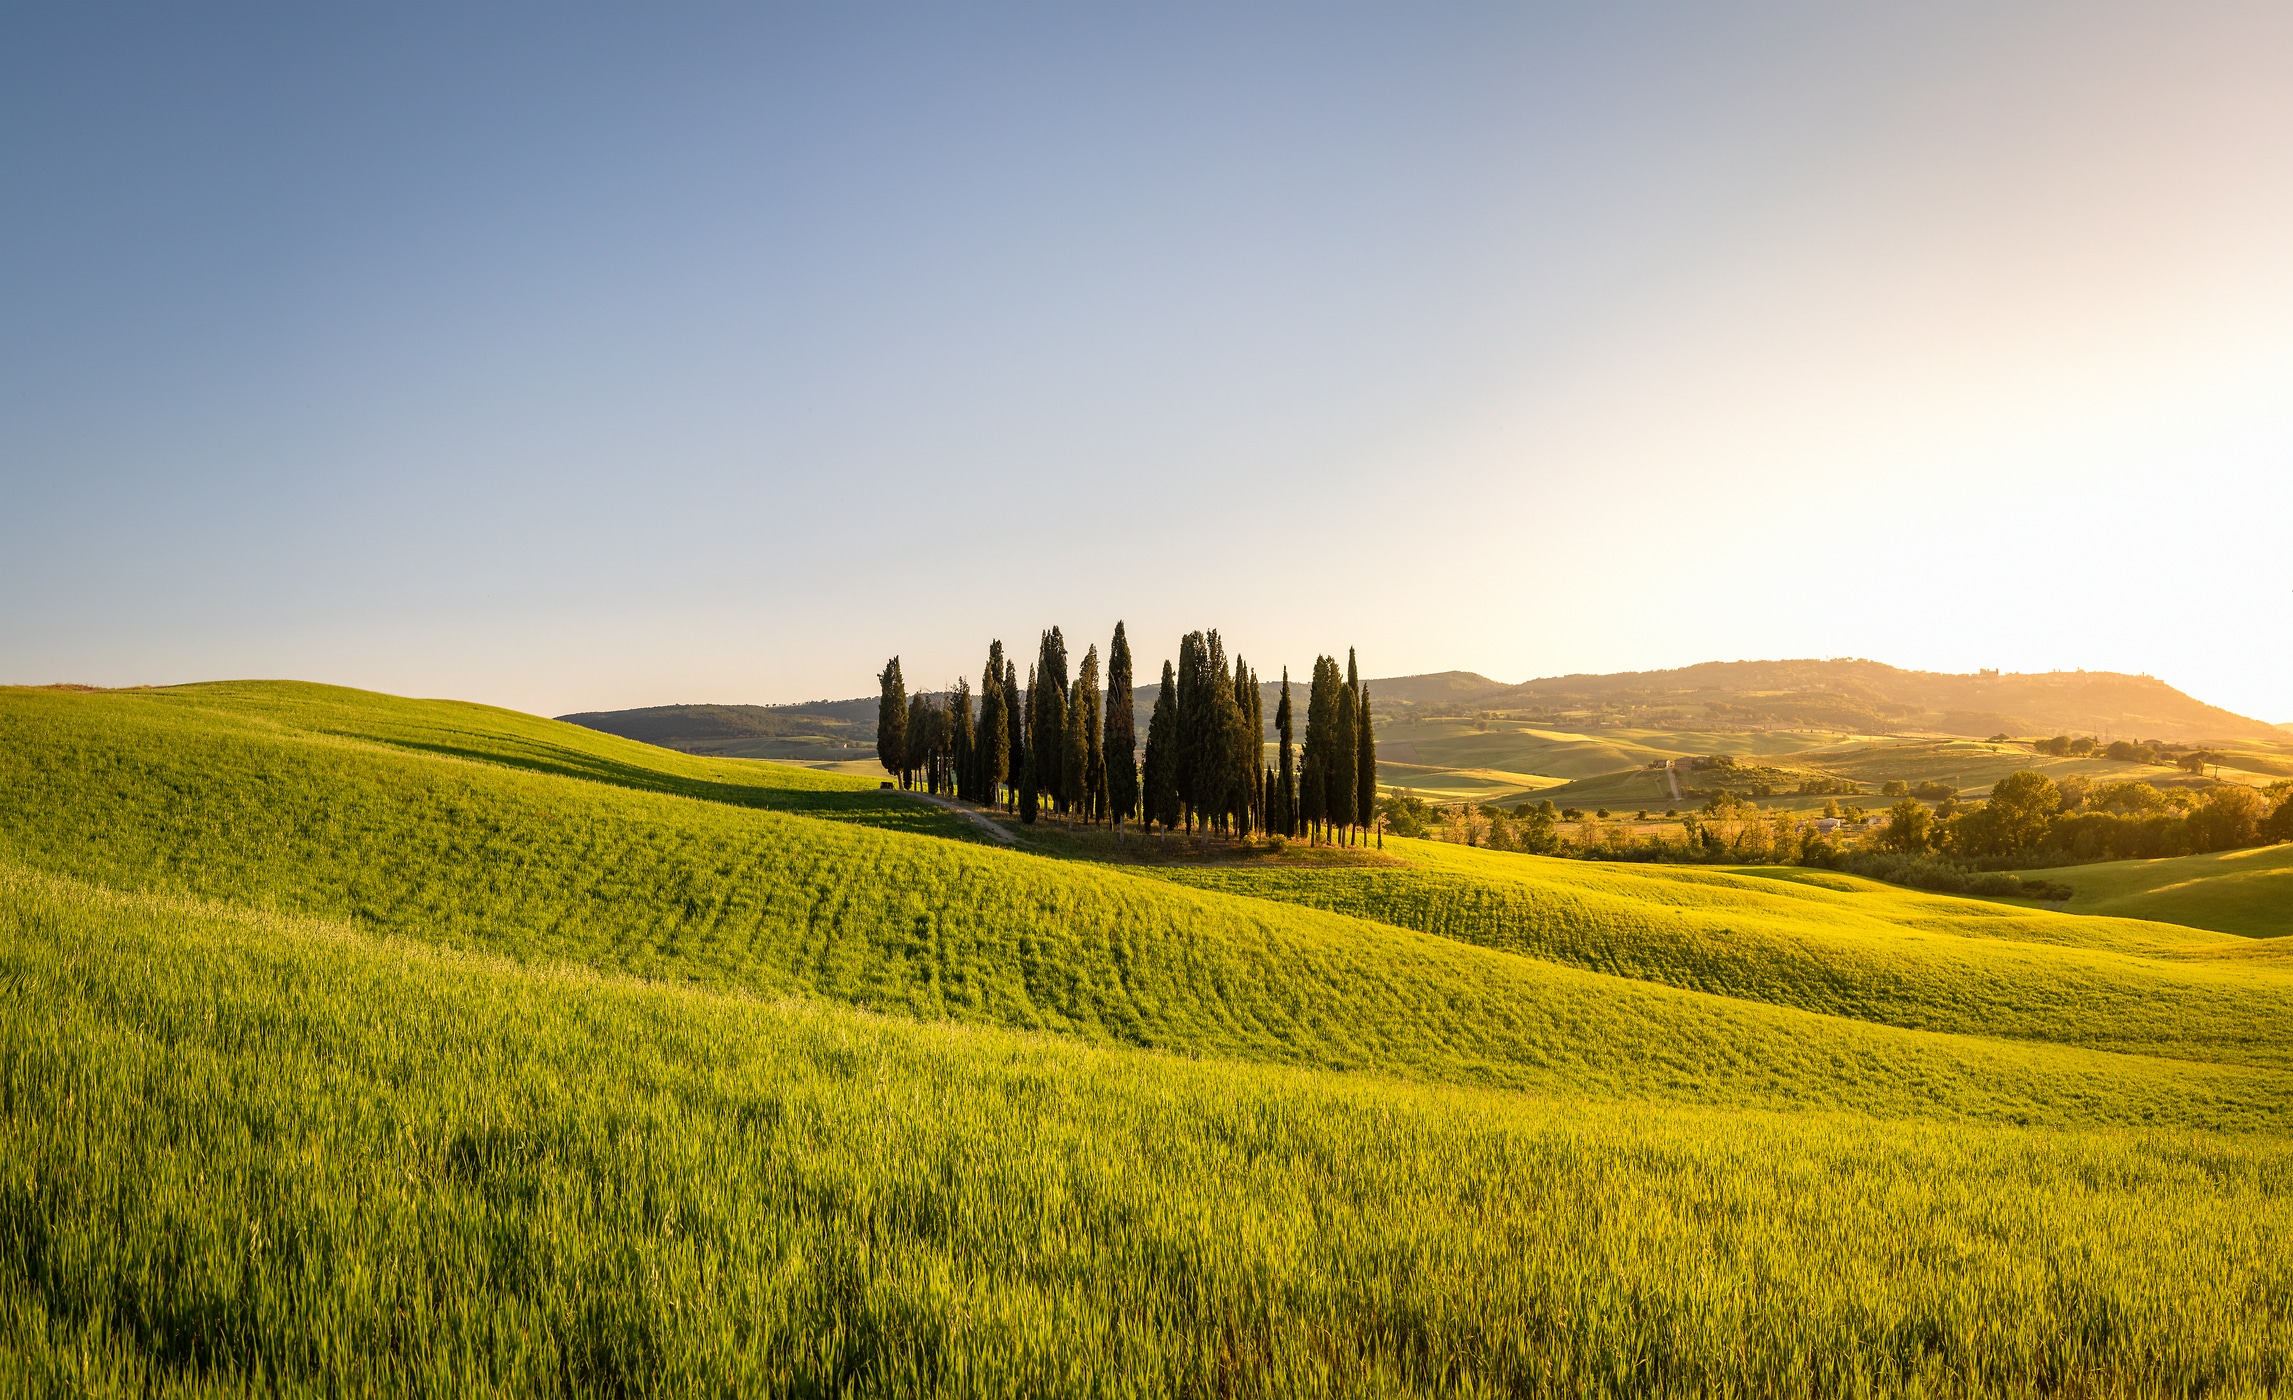 201 megapixels! A very high resolution, large-format VAST photo print of a landscape scene in Tuscany, Italy with cypress trees on a hill at sunset; art photograph created by Justin Katz in Cipressi di San Quirico d'Orcia, Tuscany, Italy.